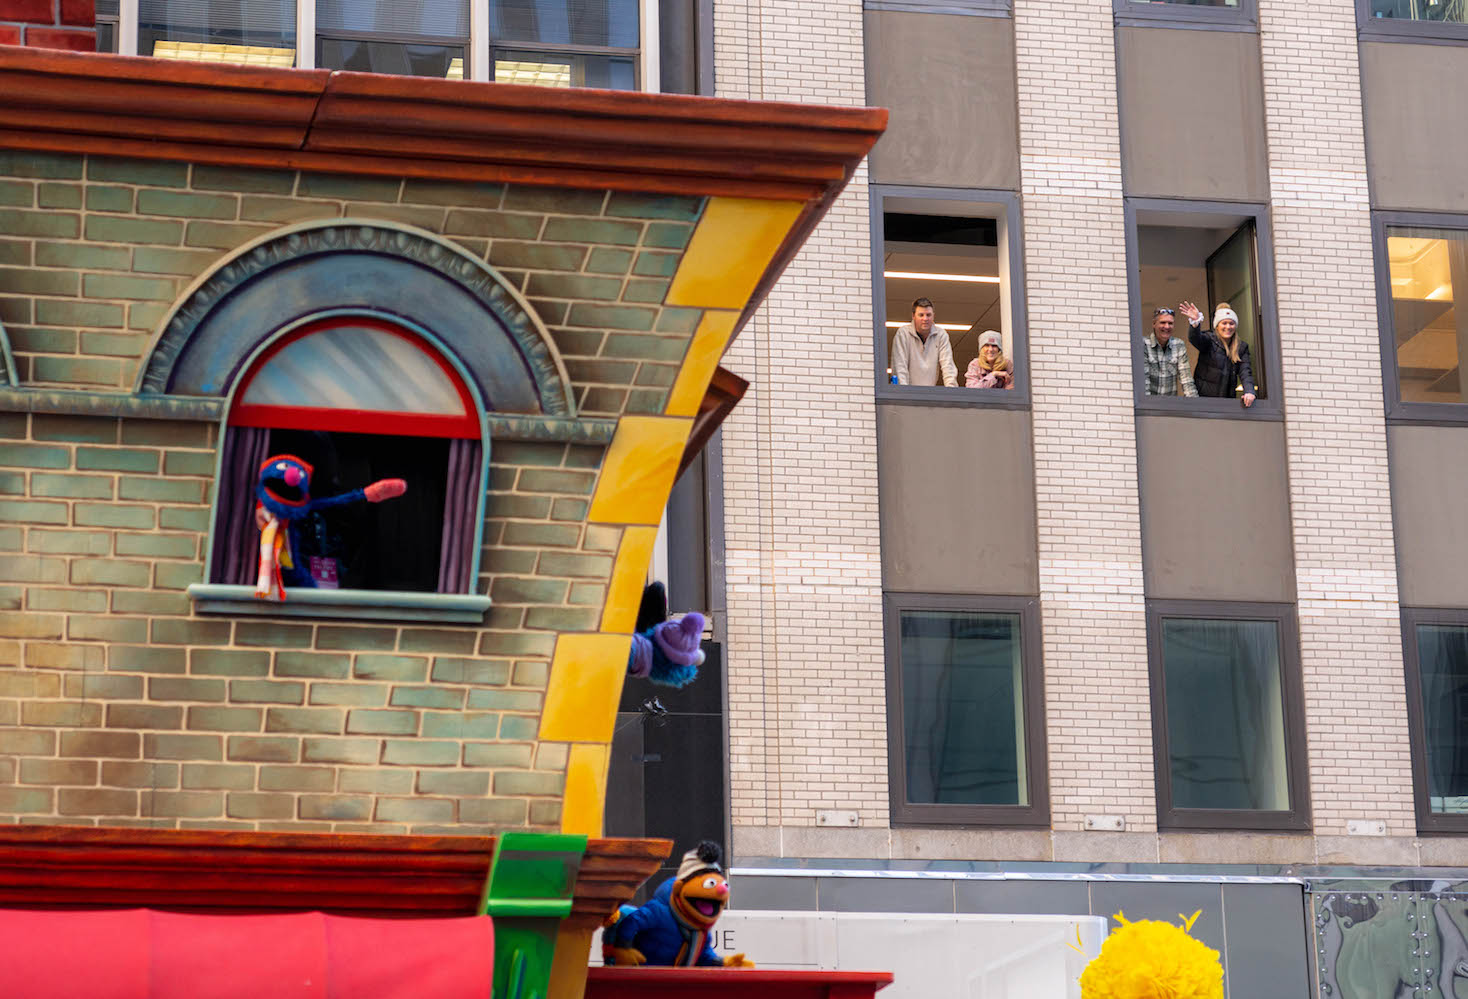 A recreation of a house in Sesame Street featuring Grover, Elmo, and Ernie proceeds on Sixth Avenue. In the background are bystanders looking at the parade through building windows.